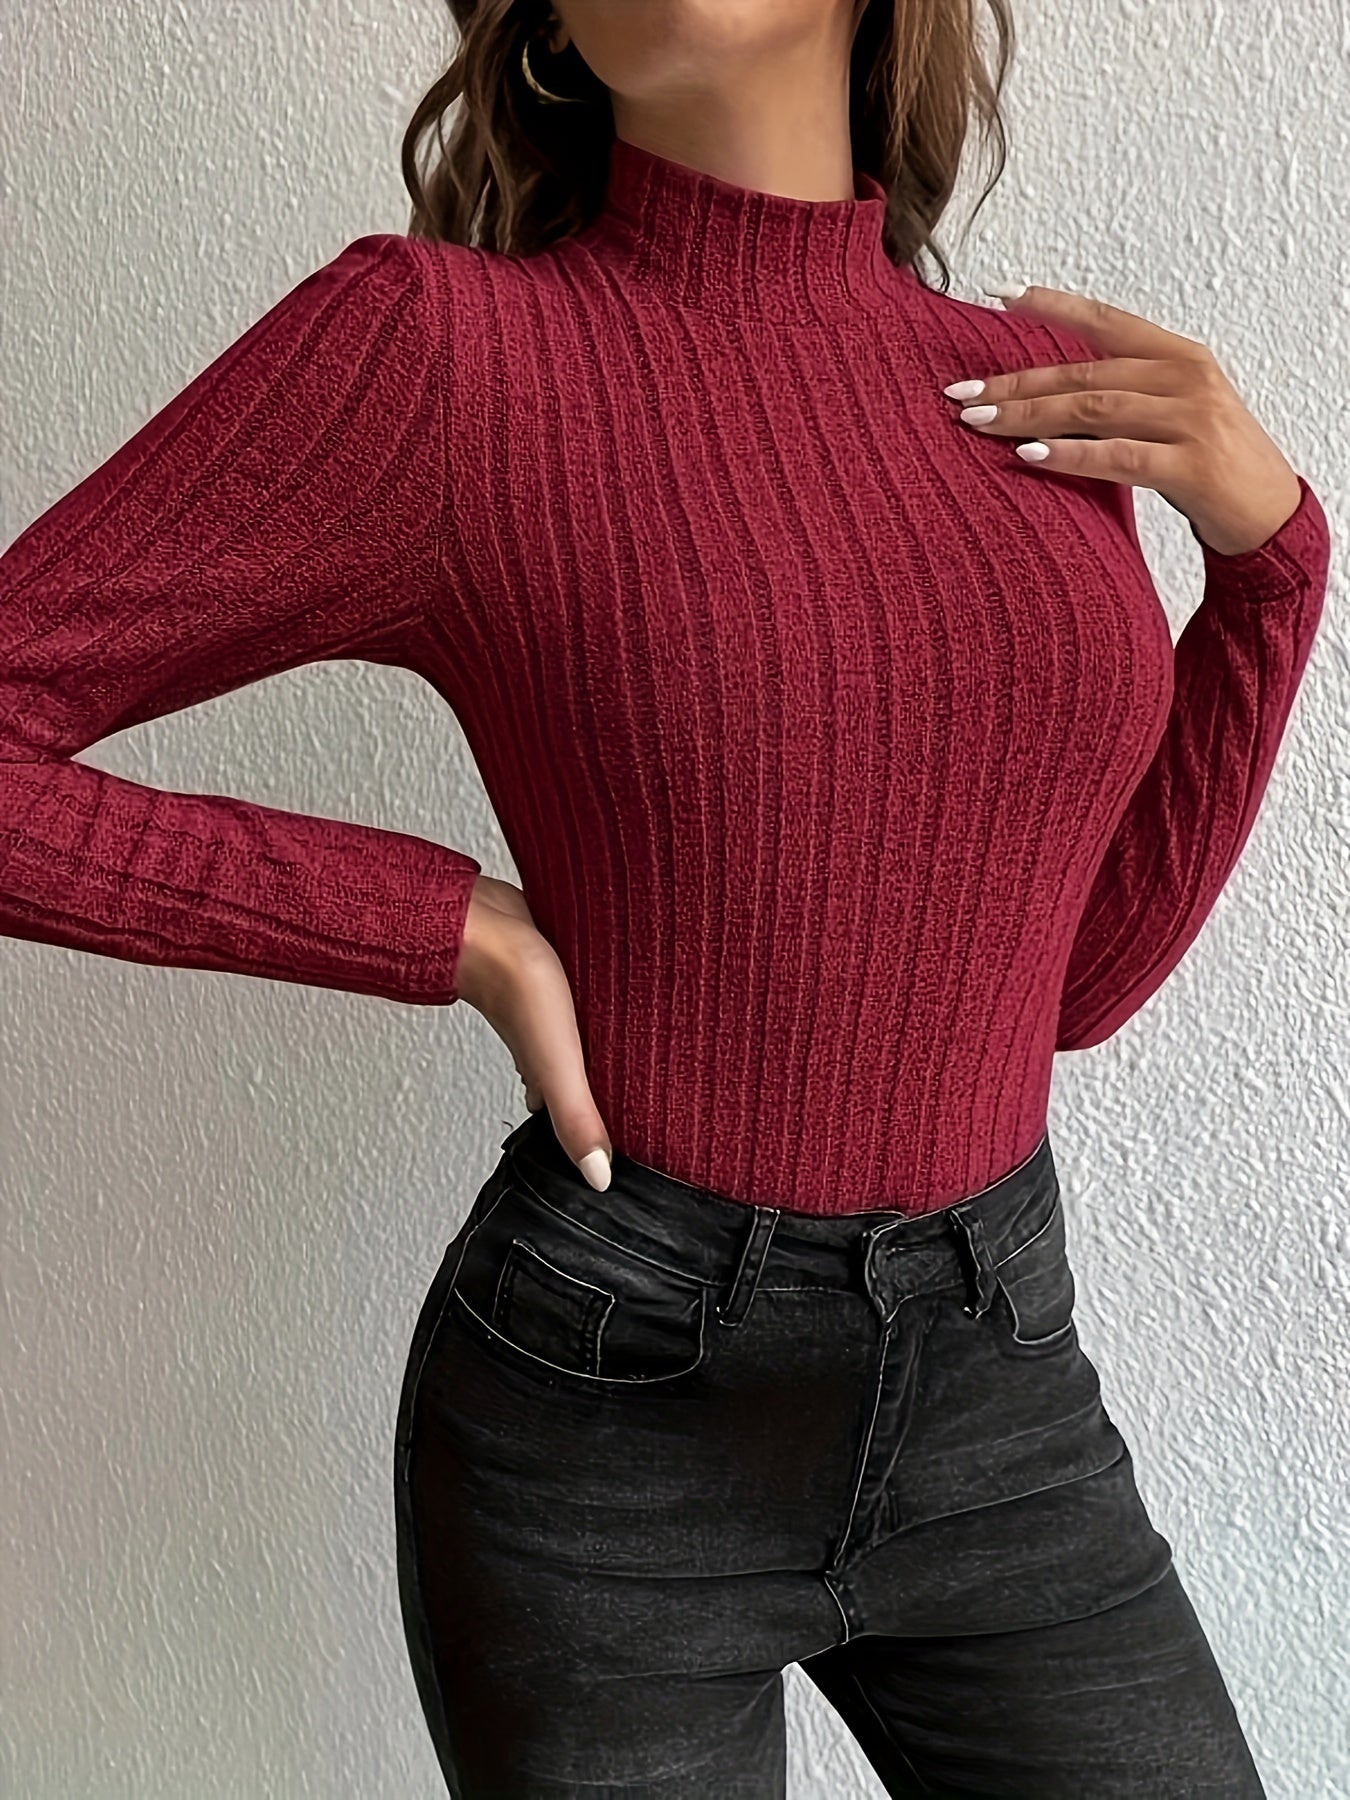 Solid Turtleneck Knit Top, Elegant Slim Long Sleeve Sweater For Spring & Fall, Women's Clothing